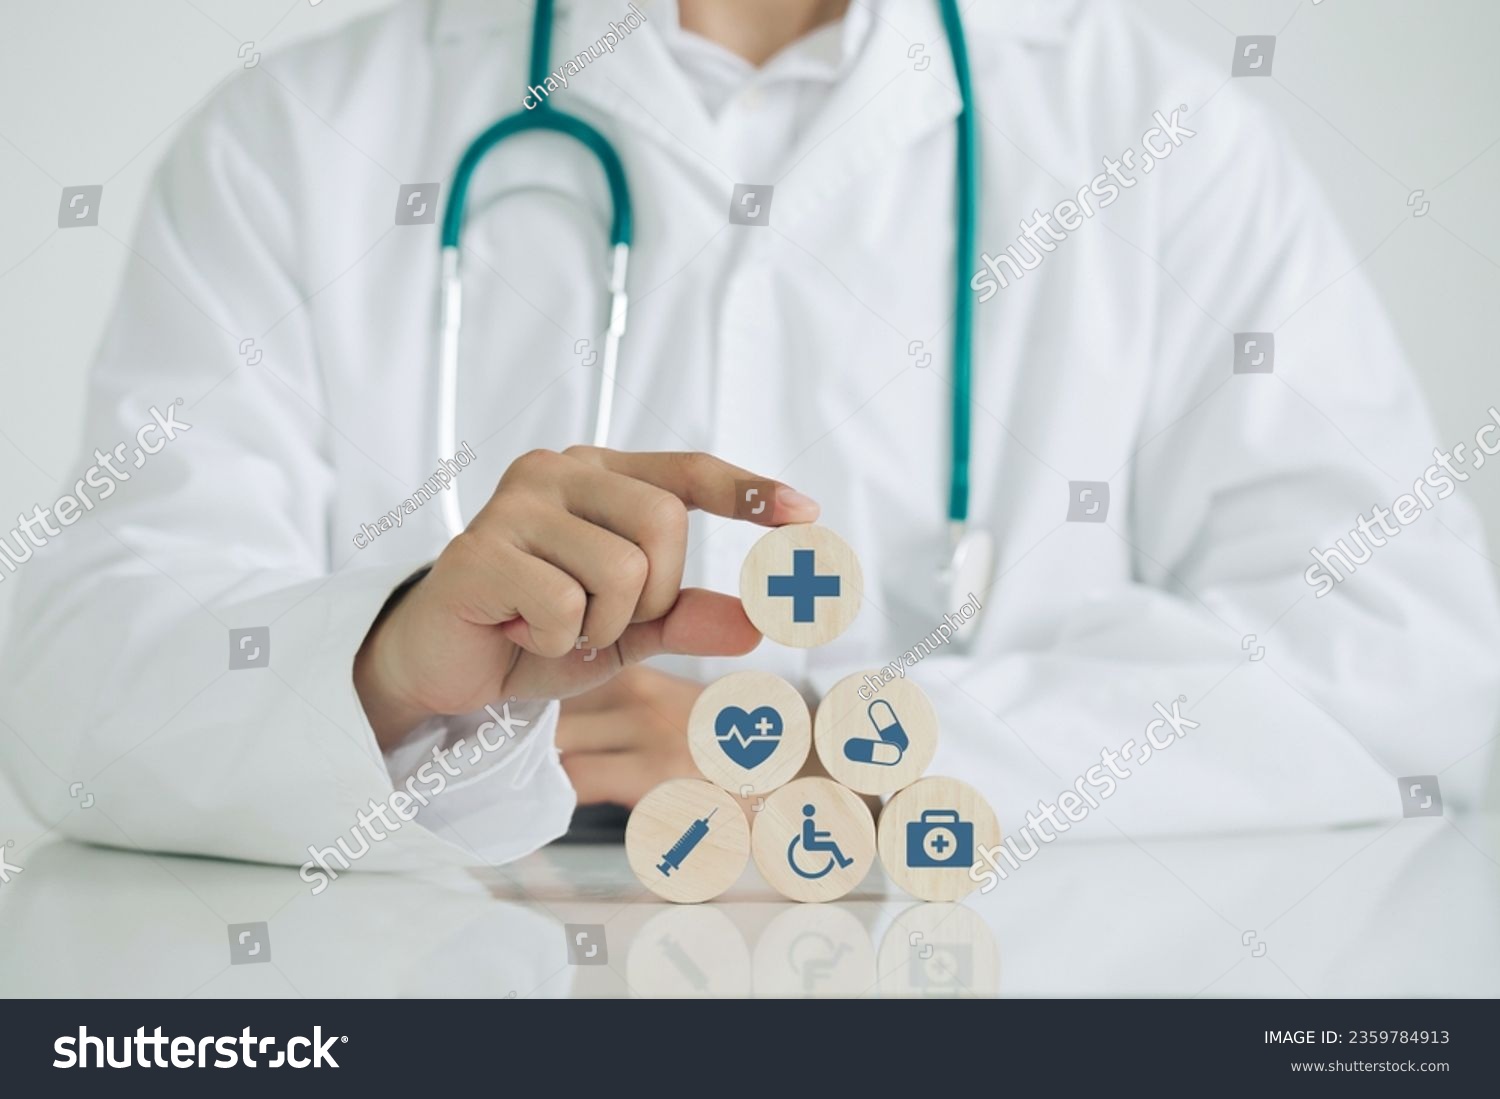 Doctor hand arranging wood block with healthcare medical icons. Healthcare and Medical Insurance concept.Good Healthcare.World Health Day. #2359784913